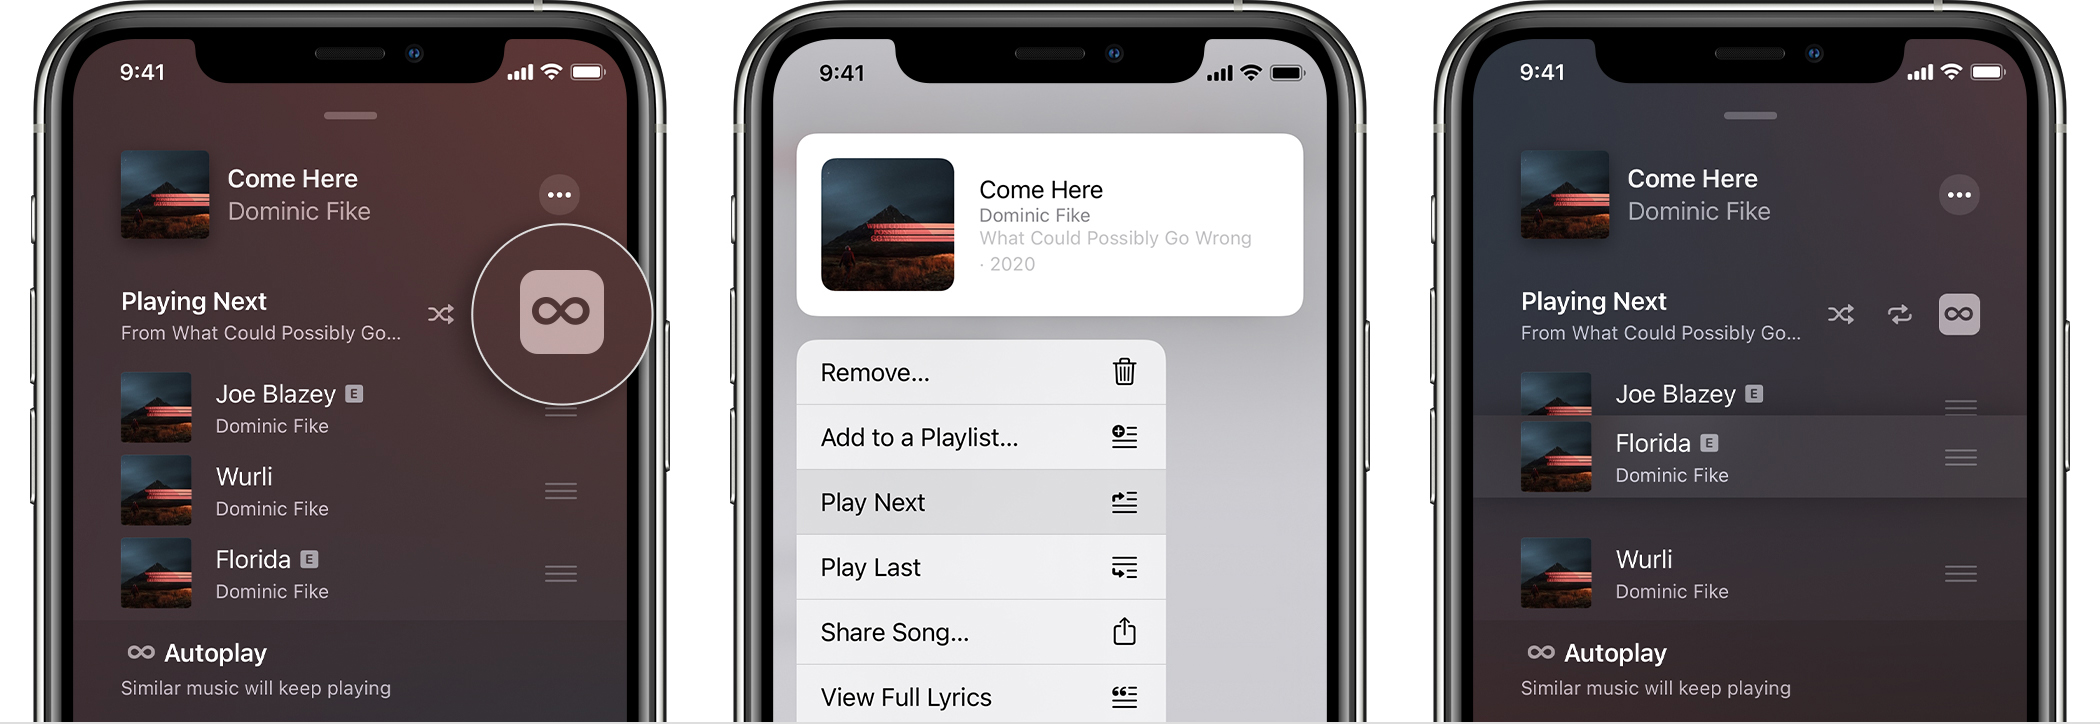 How to queue and edit what’s playing next on Apple Music